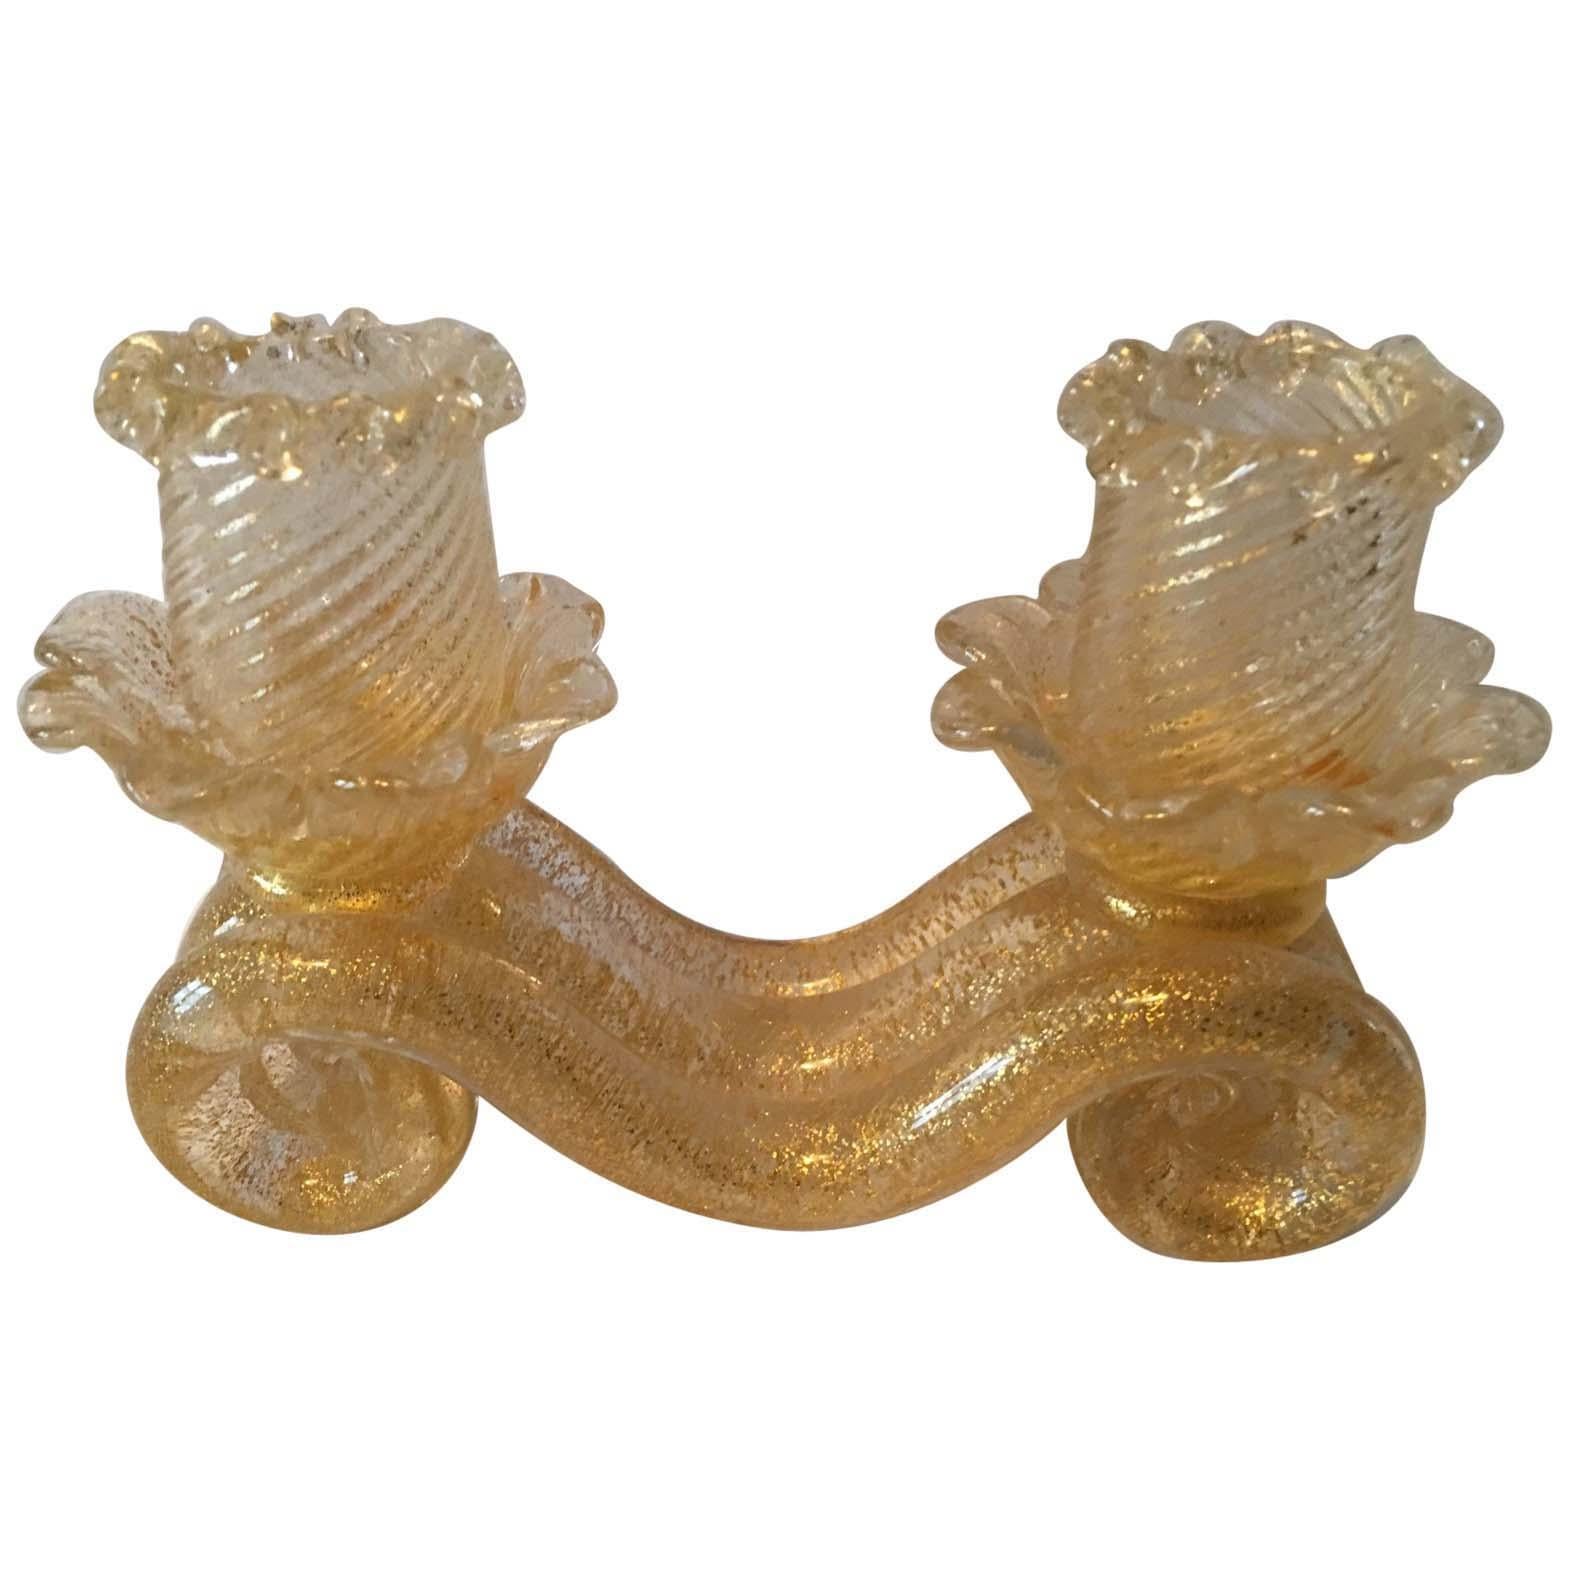 Murano Gold Flake Glass Candleholder Barovier e Toso Style, 1950s For Sale